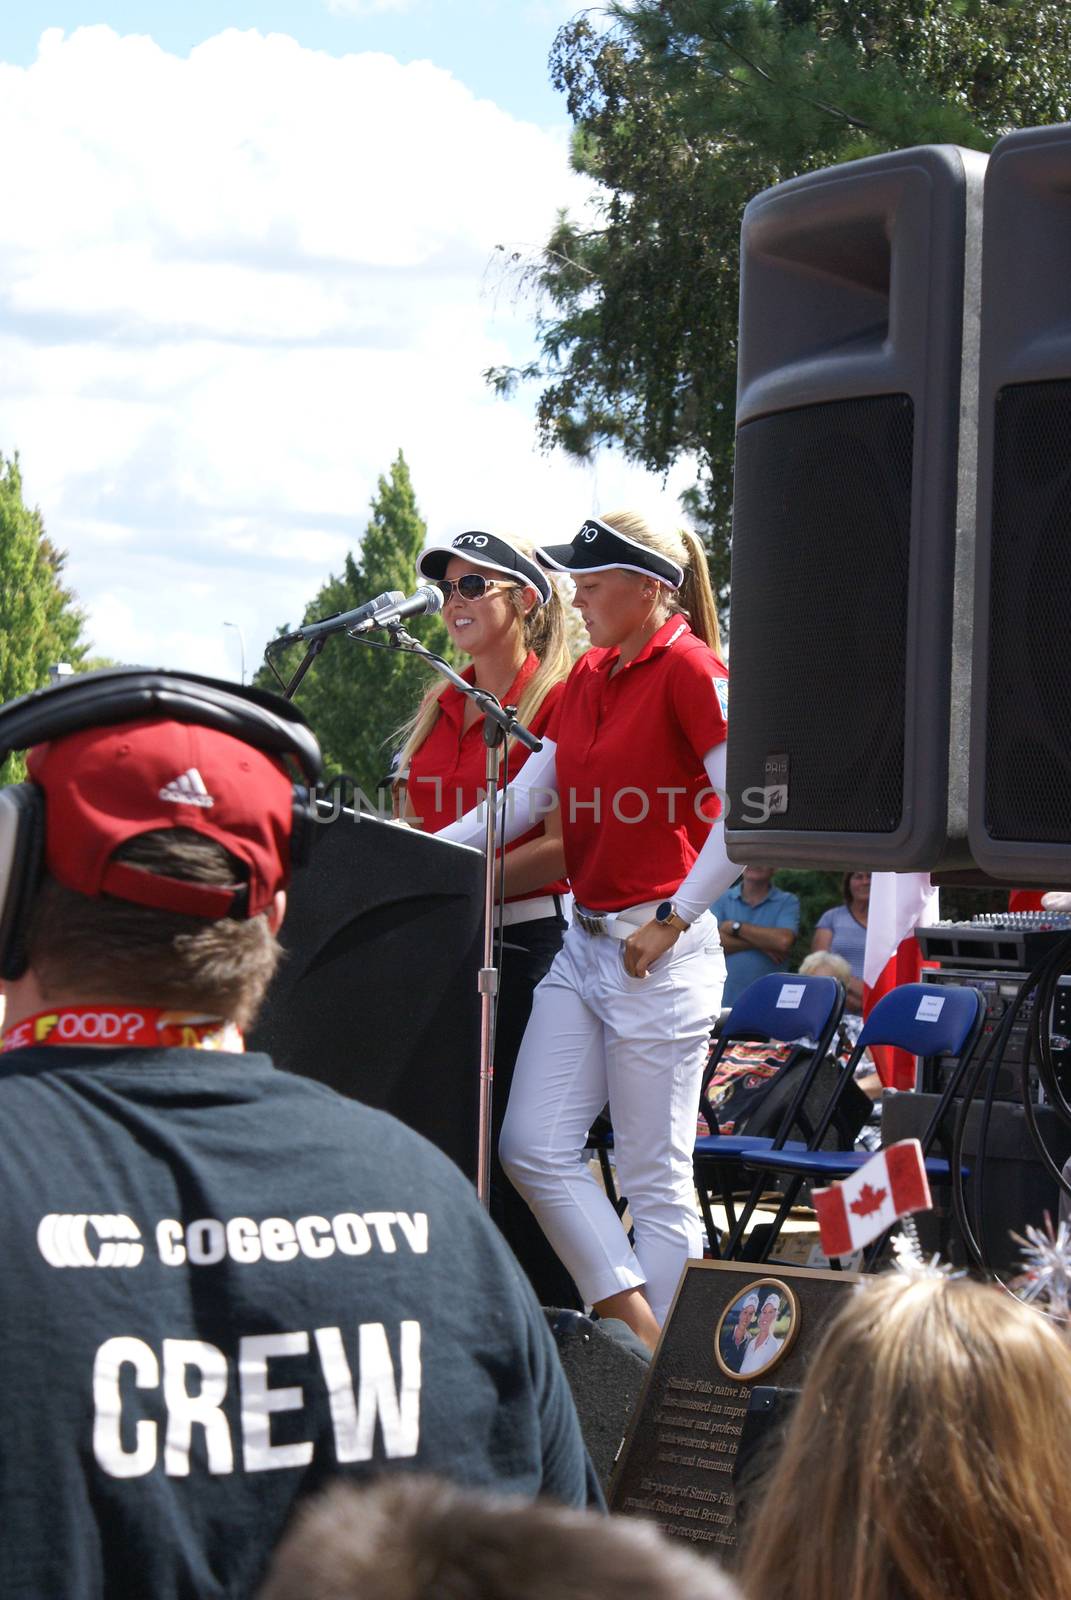 SMITHS FALLS, ON, CANADA, SEPTEMBER 09, 2016 - A 50 Editorial Image Series of local Pro Golf Sensations Brooke M. Henderson and her sister Brittany Henderson giving a speech in front of their Hometown of Smiths Falls shortly after the efforts in the Summer Rio Olympics.